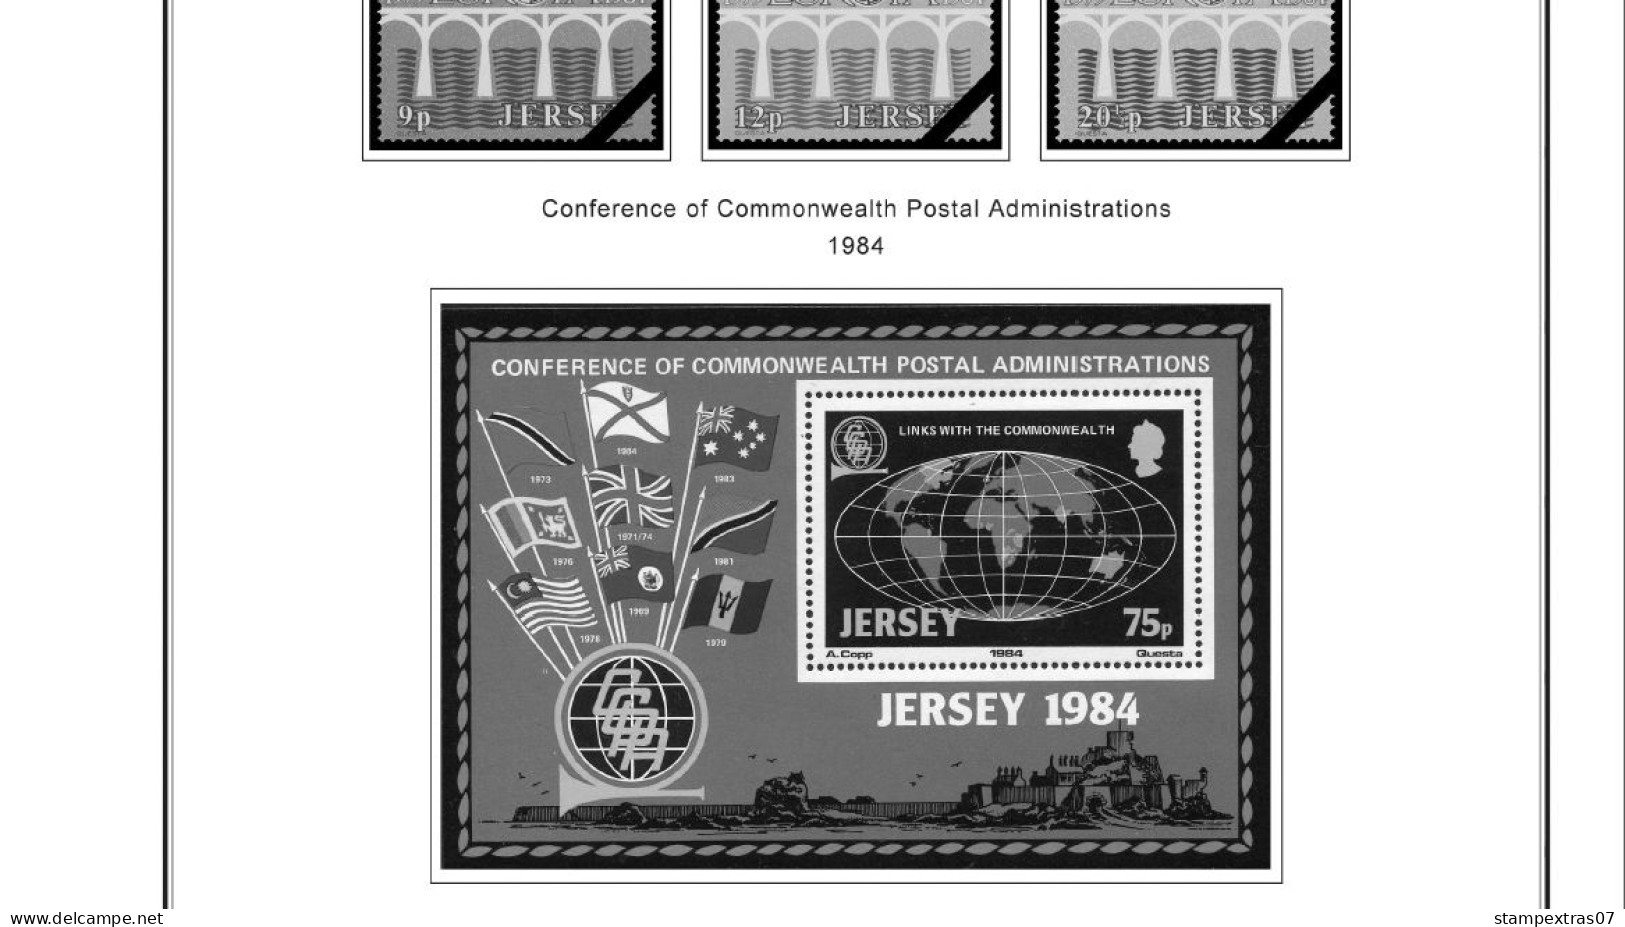 GB JERSEY 1958-2010 + 2011-2020 STAMP ALBUM PAGES (333 b&w illustrated pages)